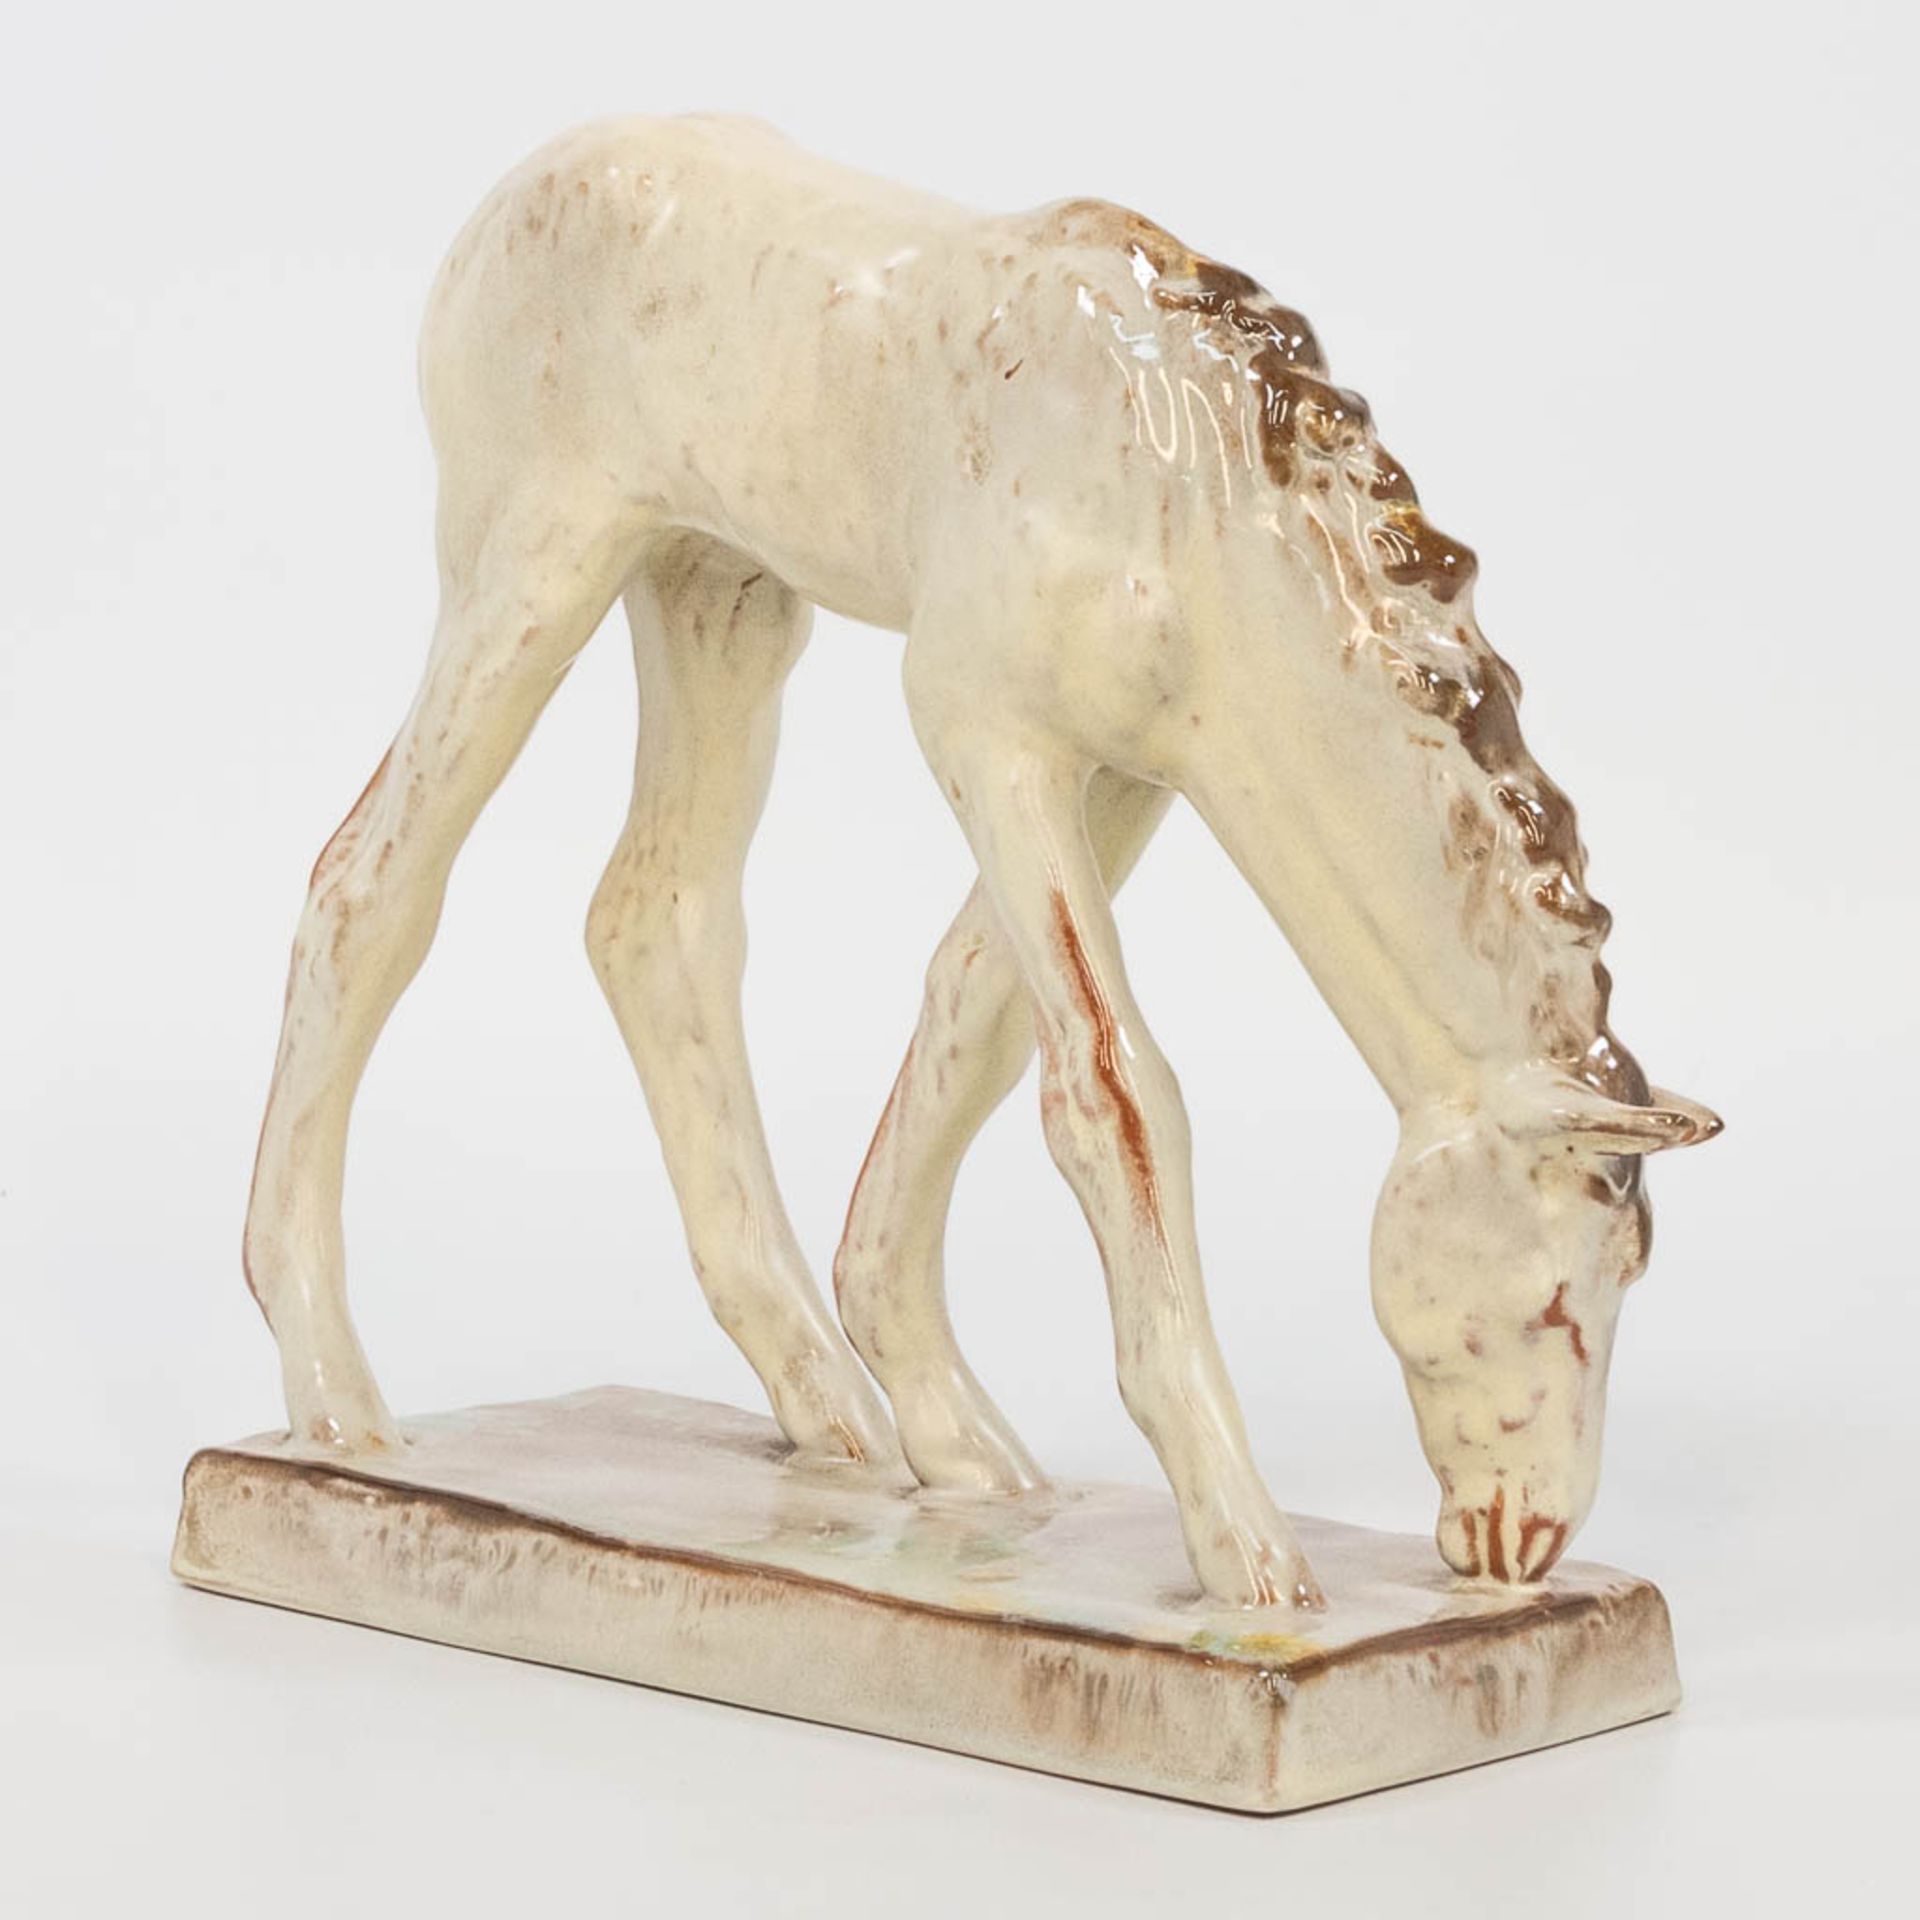 Else BACH (1899-1950) for Karlsruhe Majolica, a statue of a horse. (9 x 23 x 21,5 cm) - Image 6 of 16